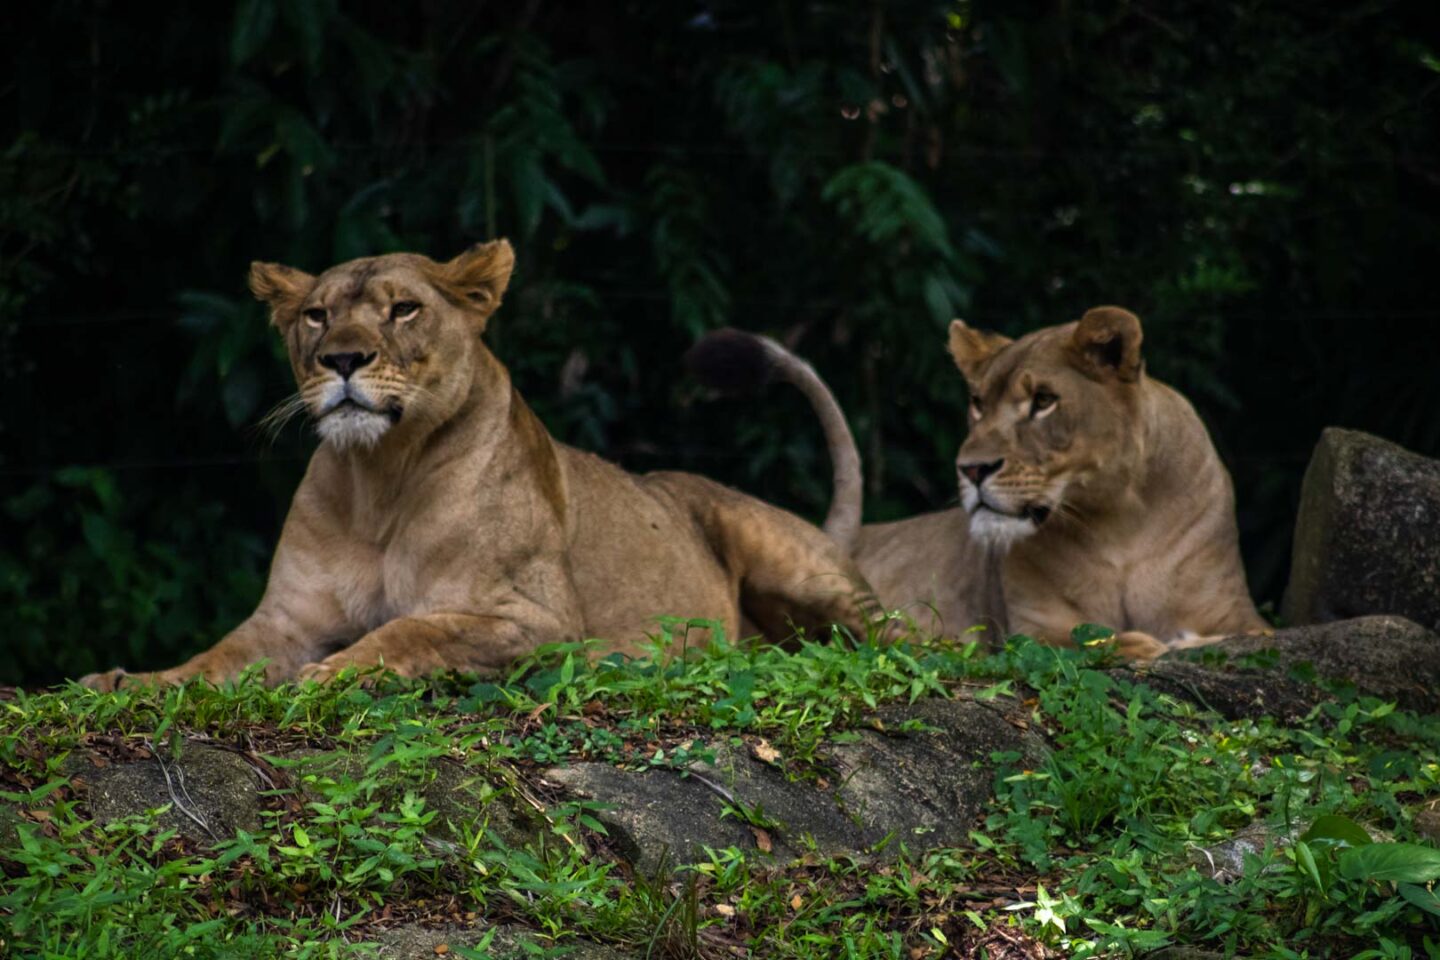 Lionesses at Singapore Zoo